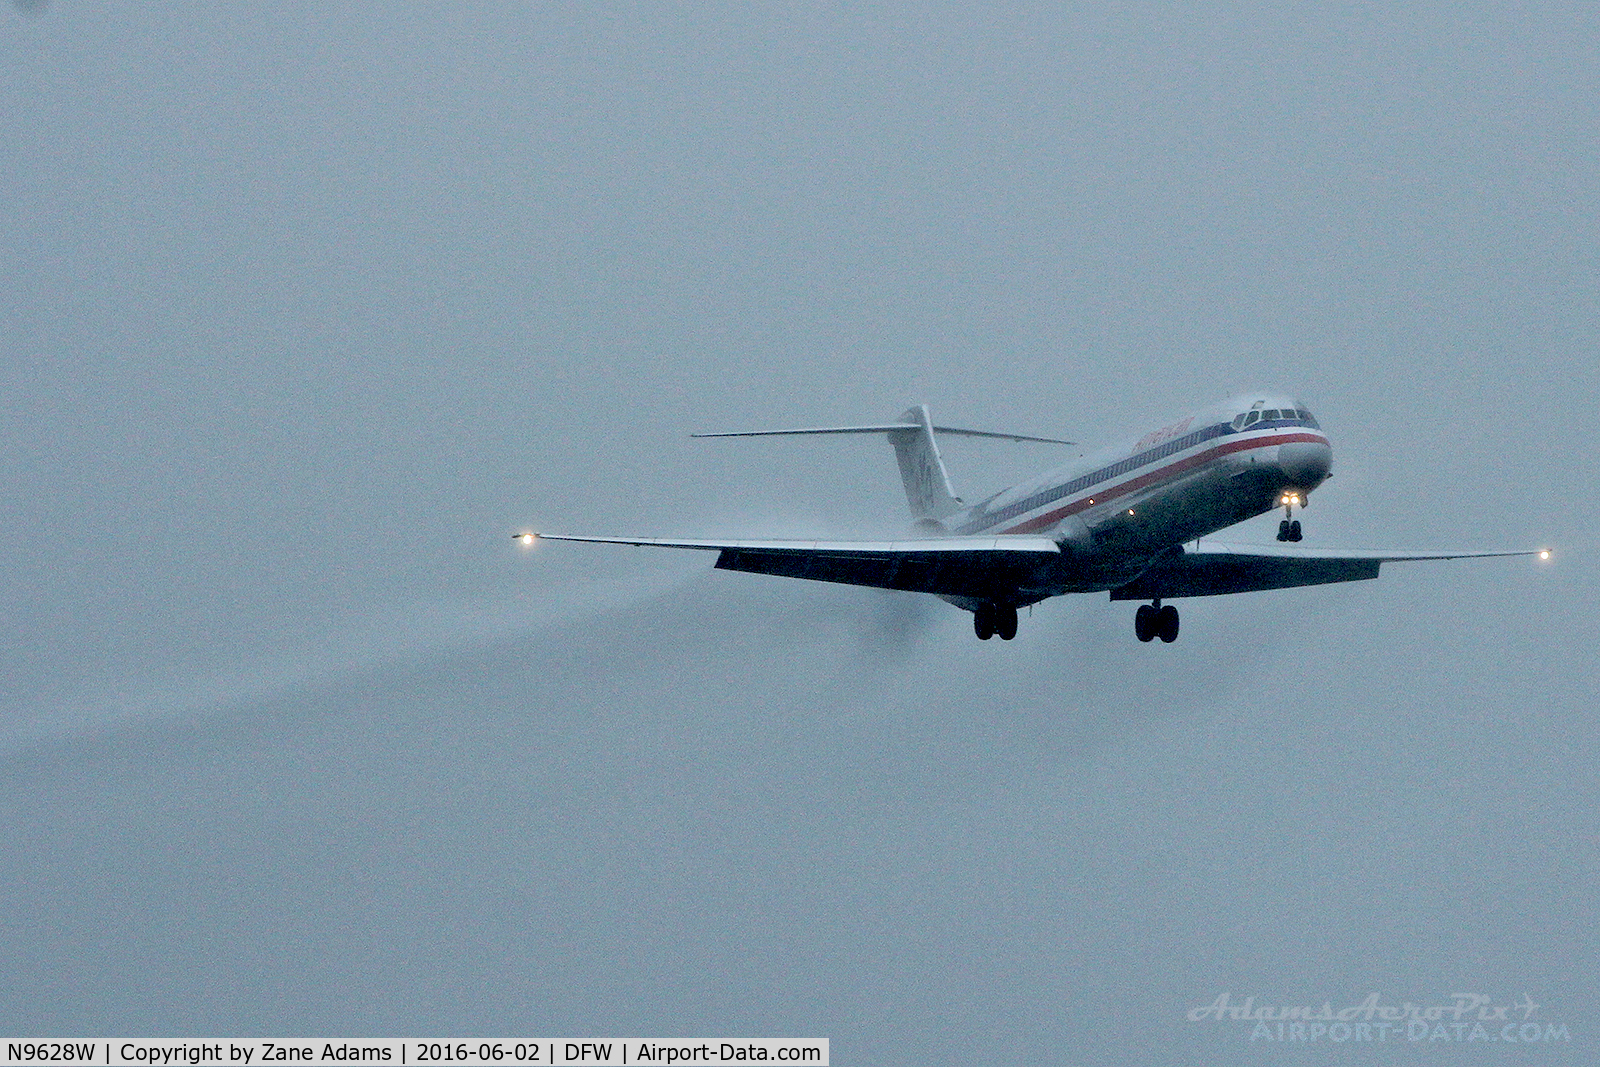 N9628W, 1998 McDonnell Douglas MD-83 (DC-9-83) C/N 53598, Arriving at DFW Airport